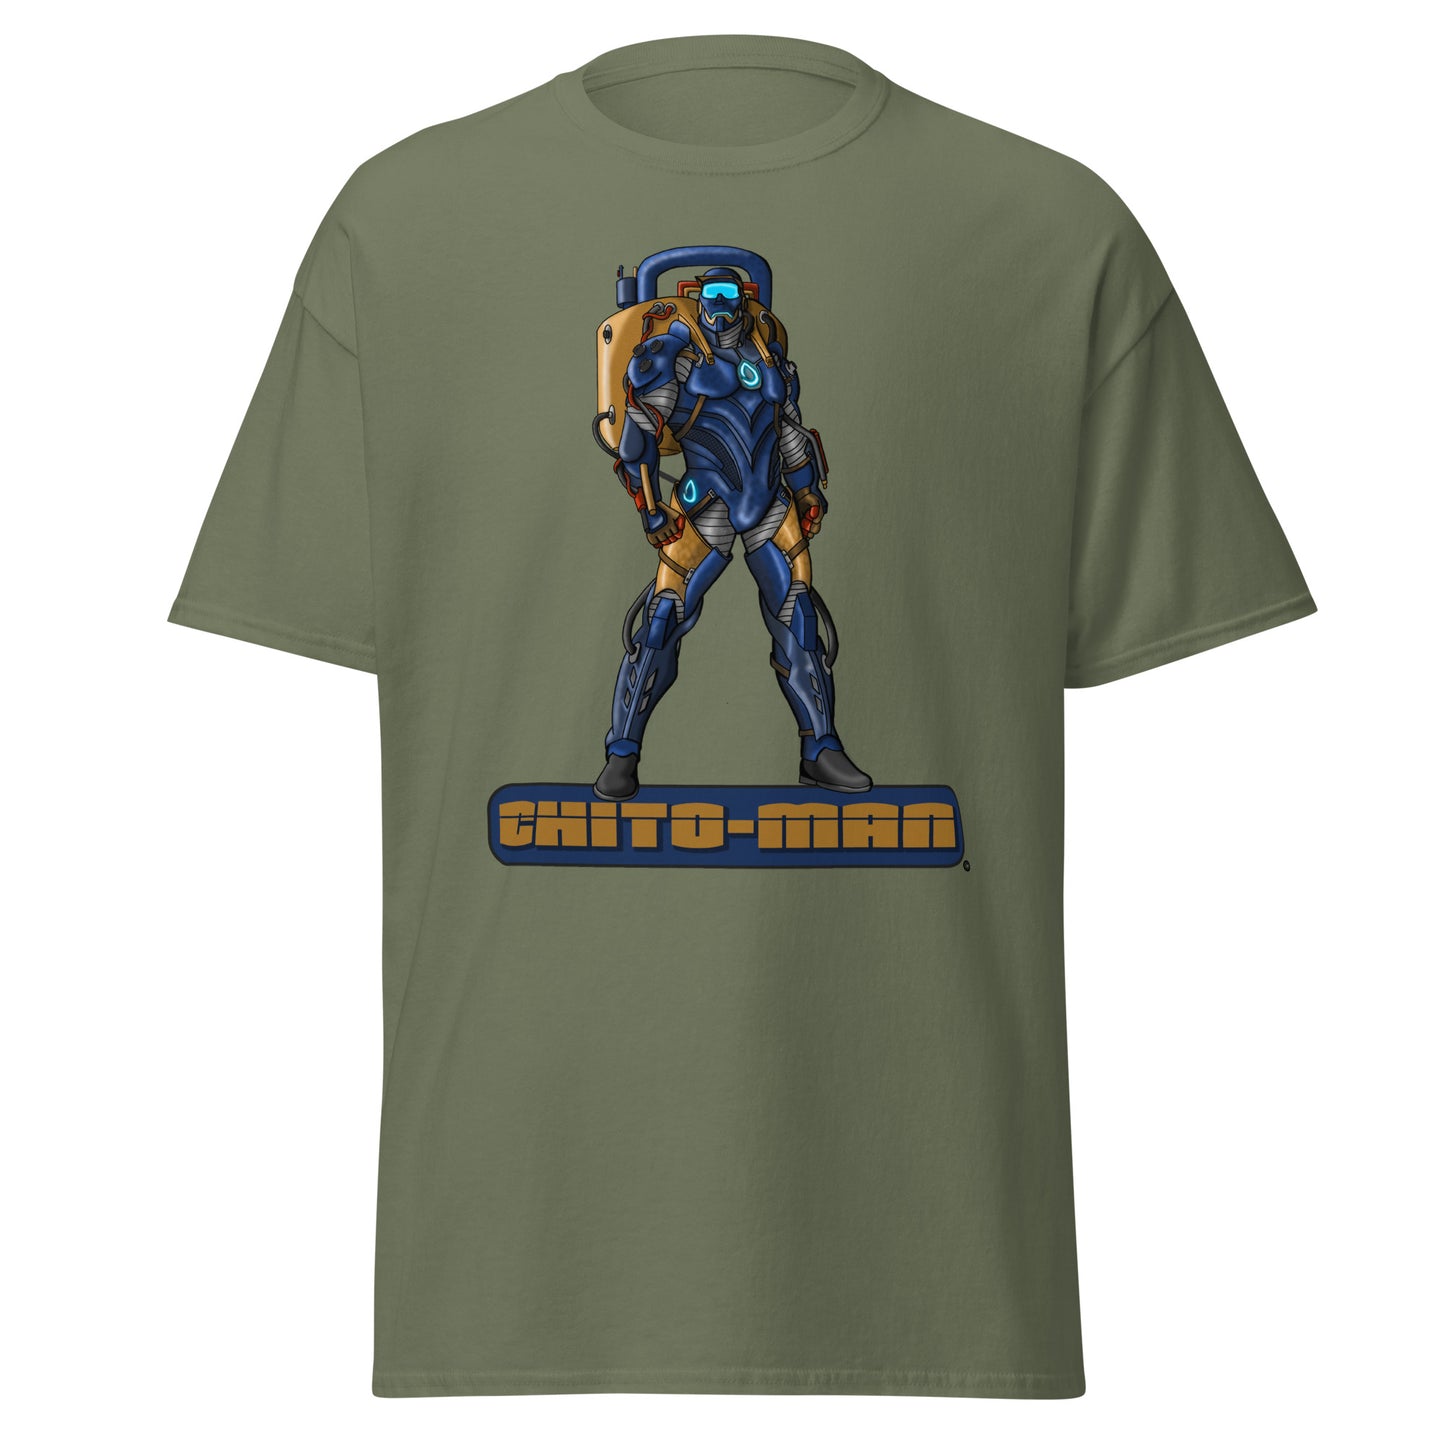 Stormwater Defenders: Chito-Man - Classic tee